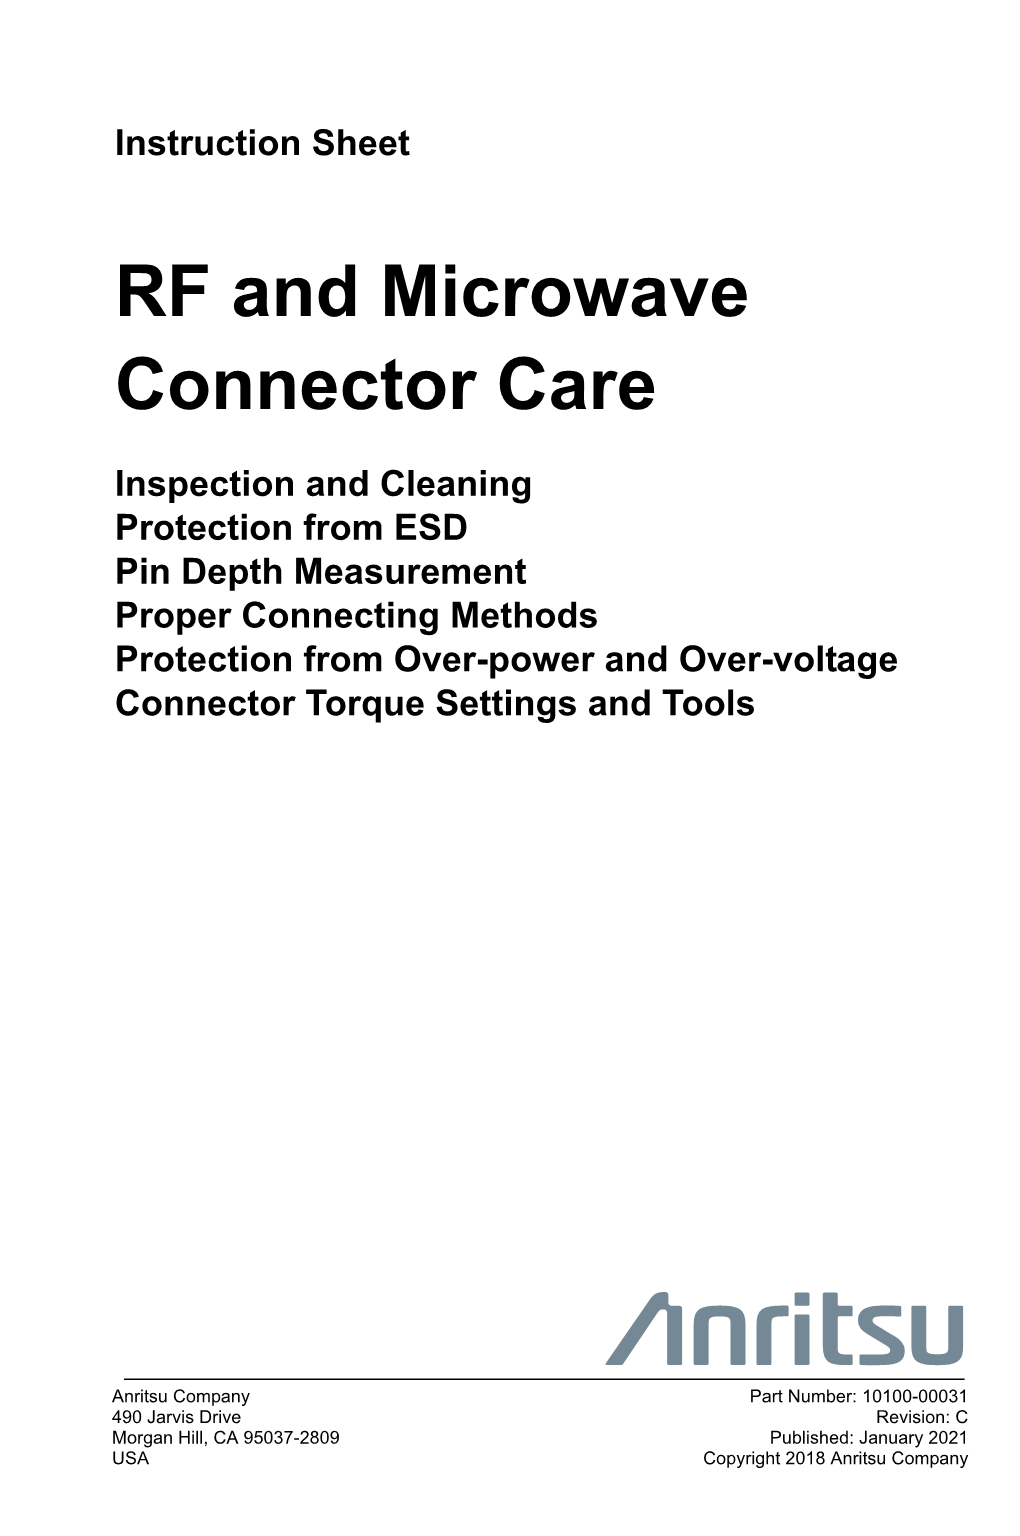 RF and Microwave Connector Care